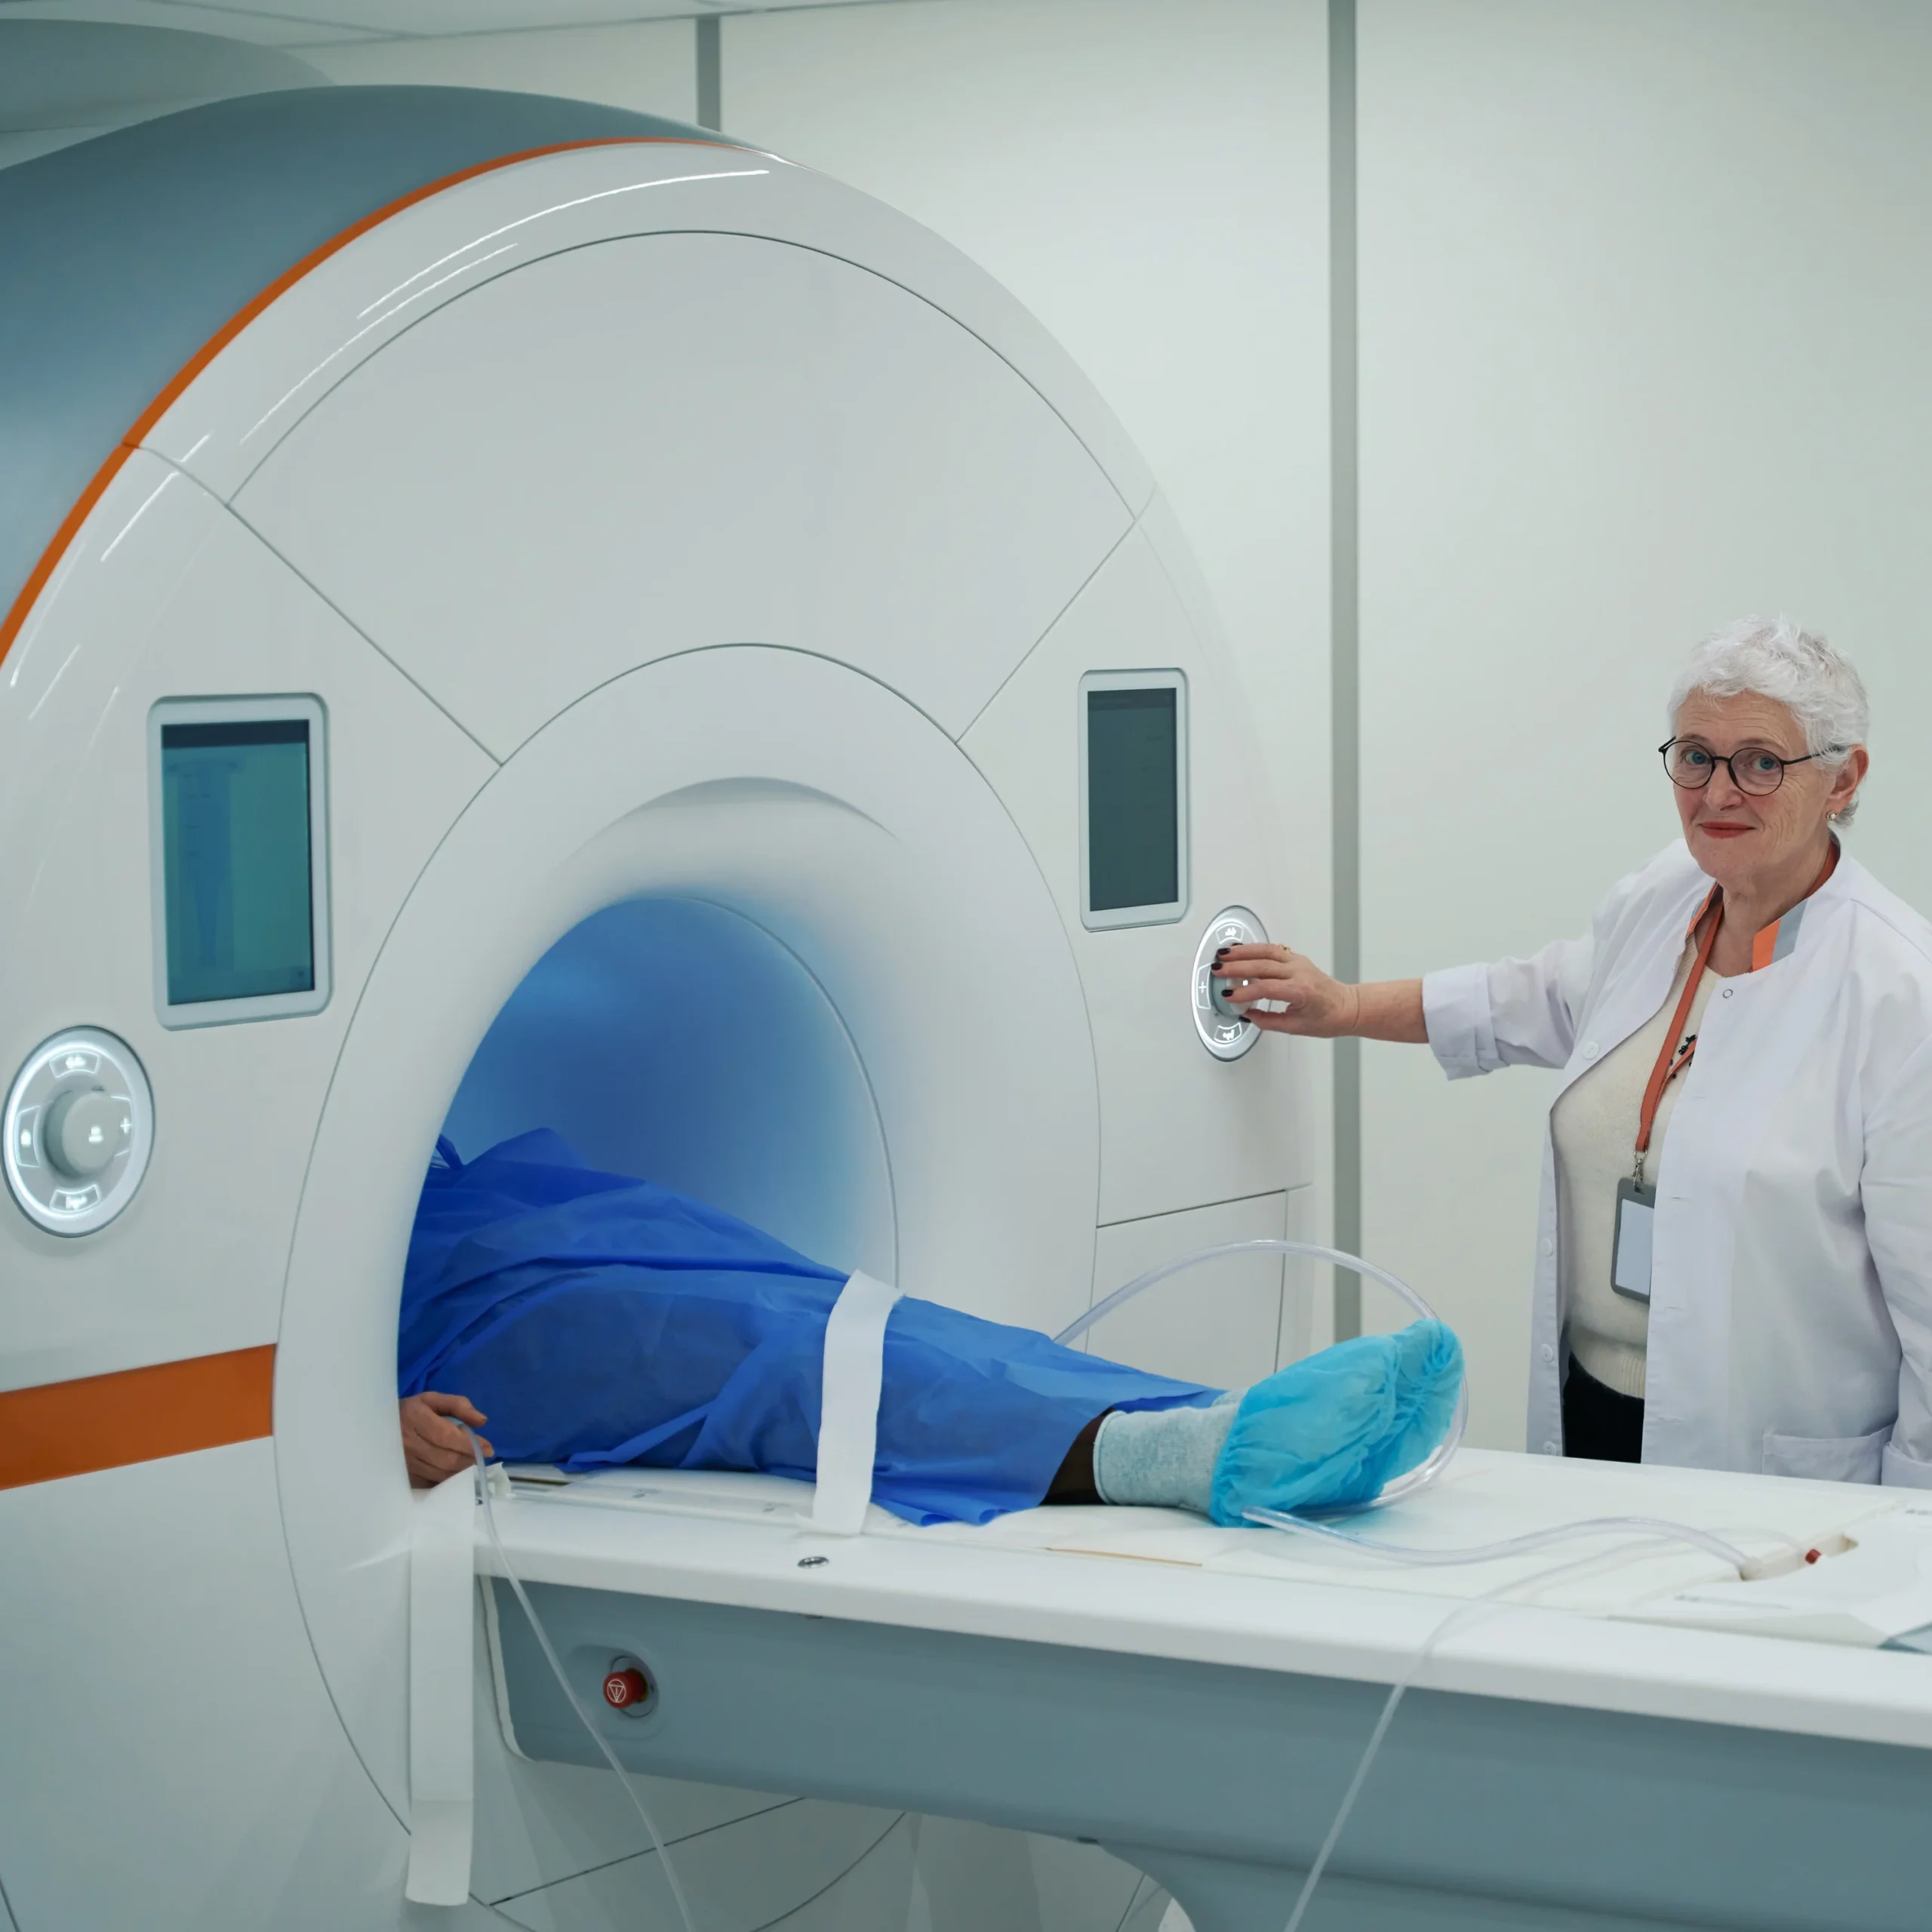 How to perform mri